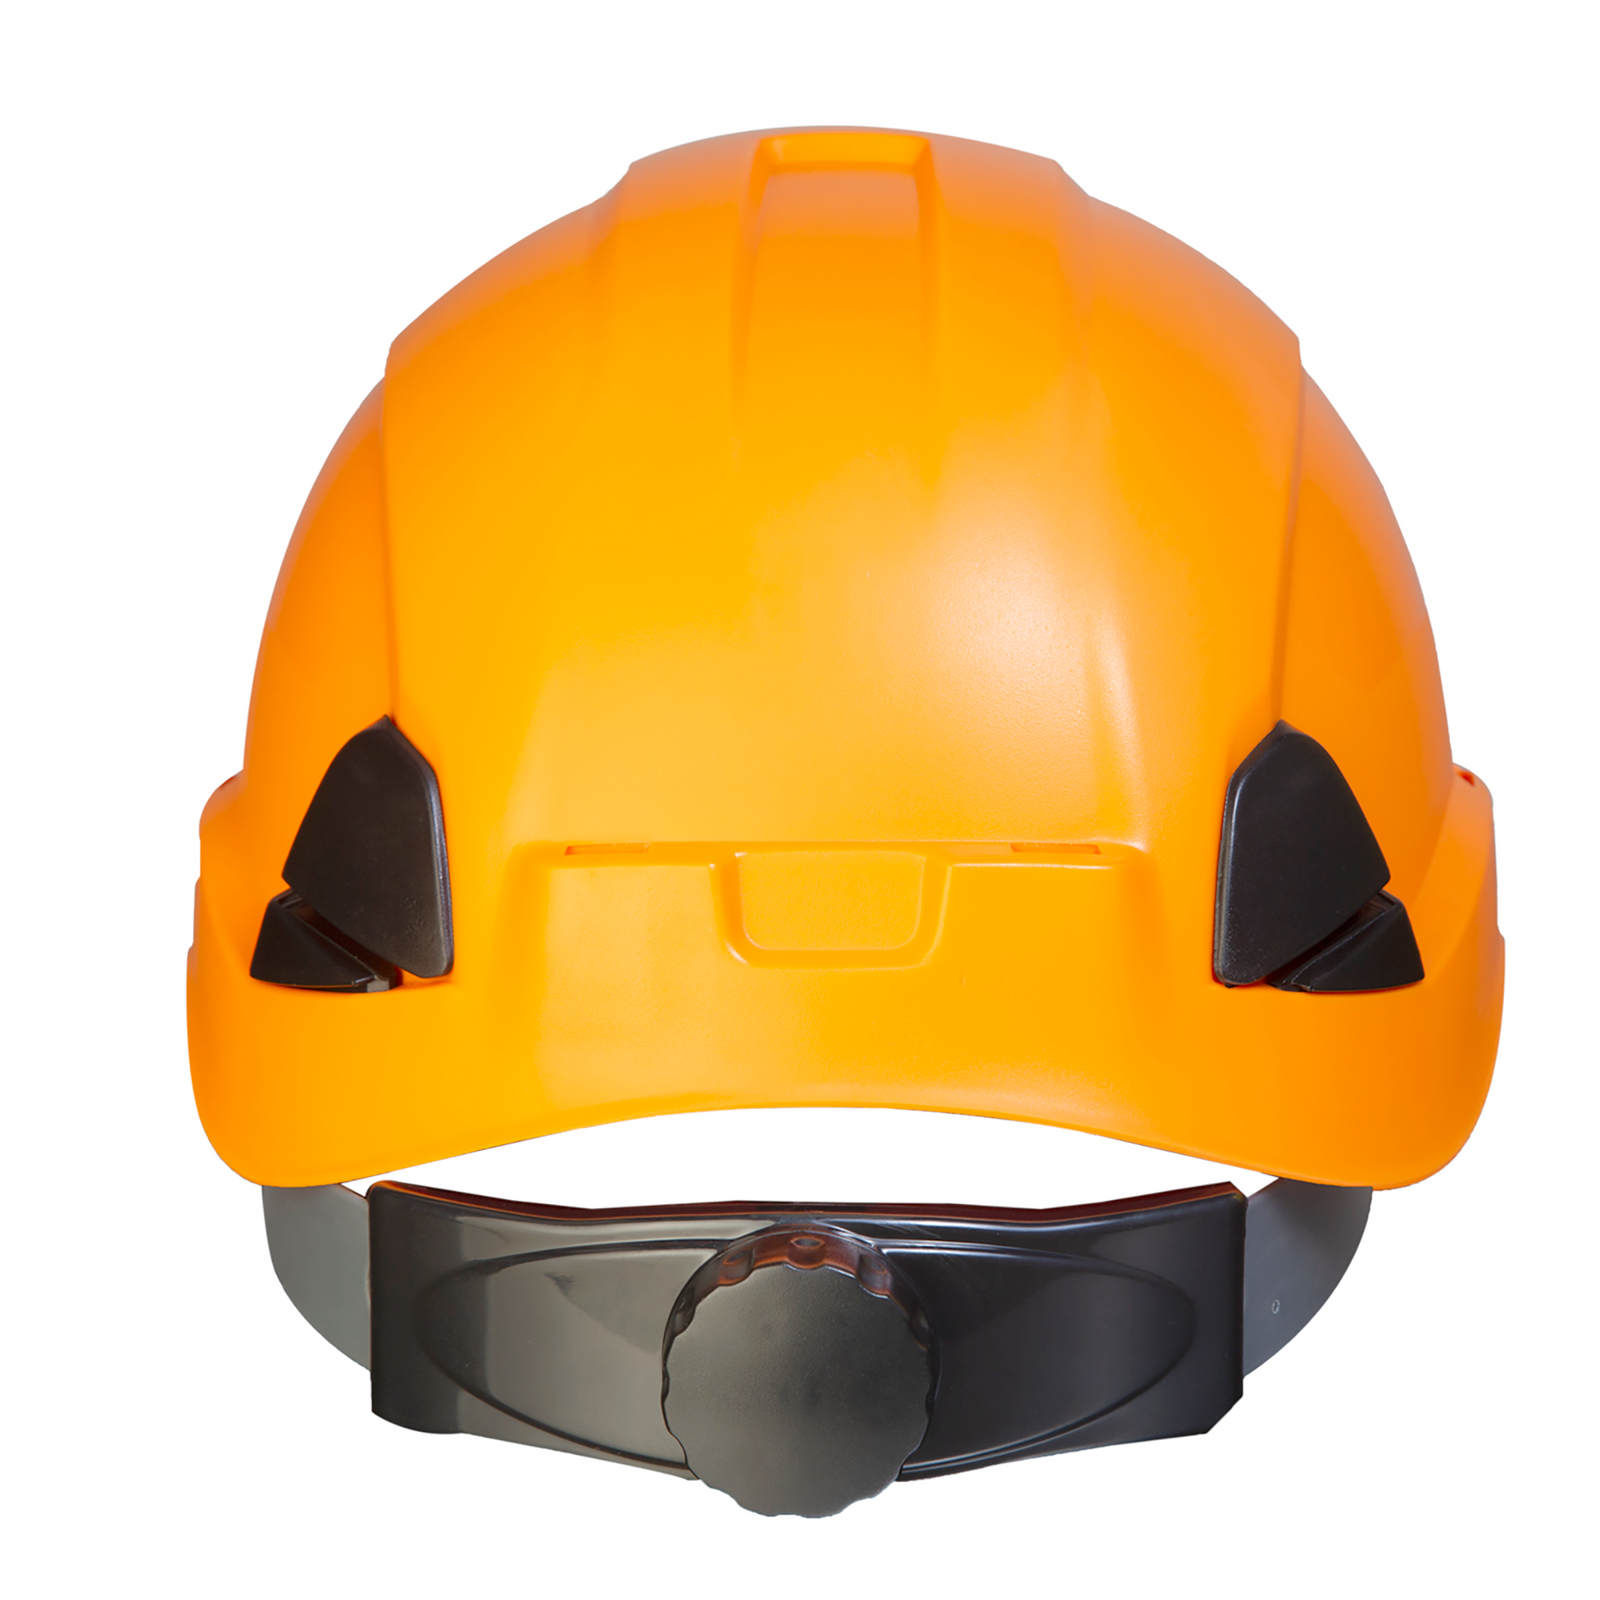 orange hard hat with chin strap and clamps for head lamp